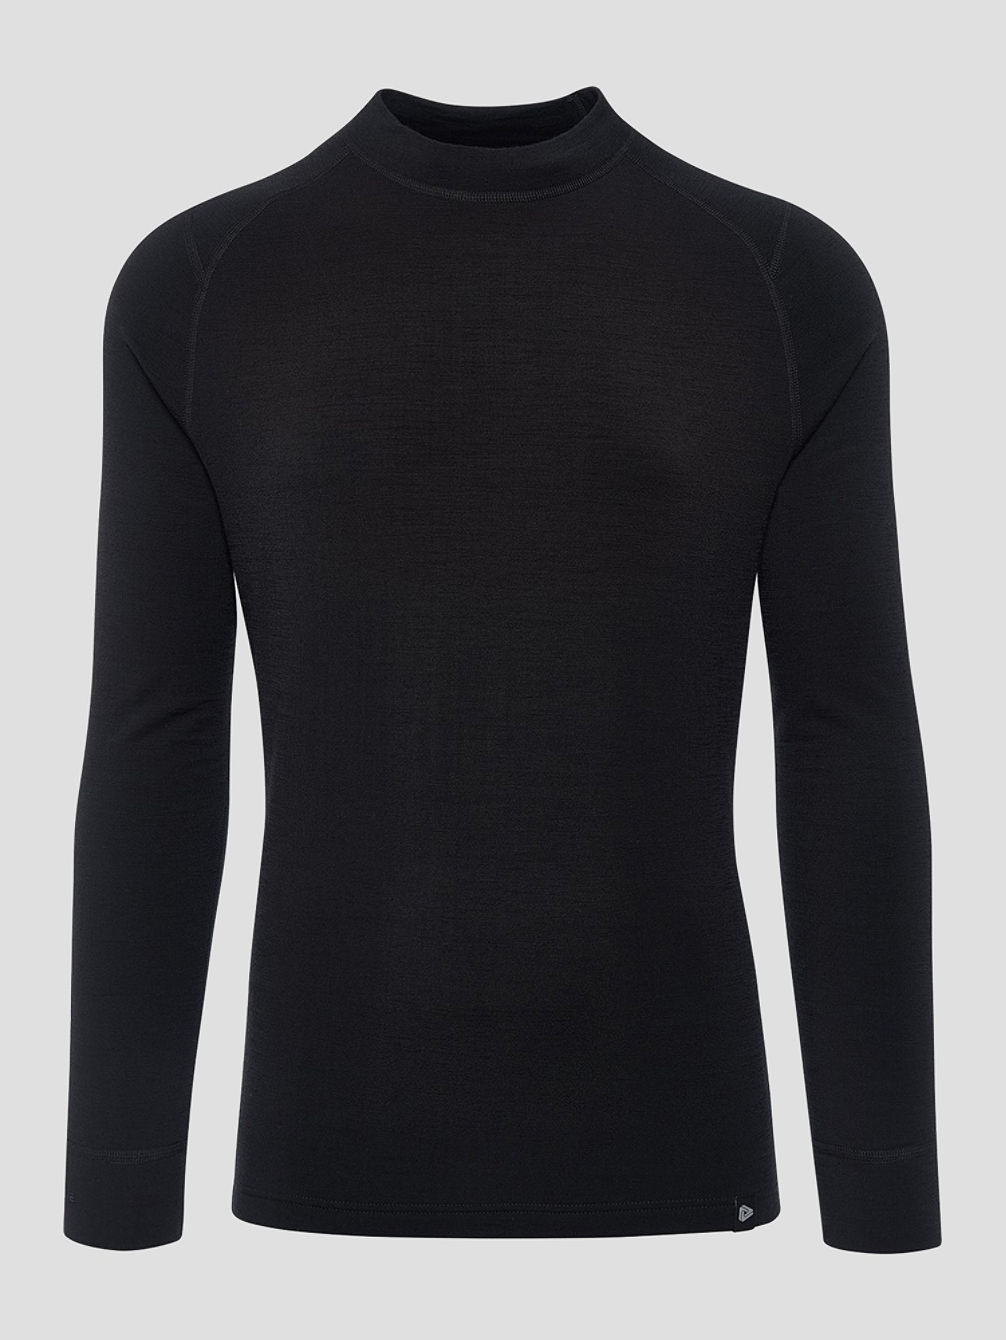 Thermo shirt